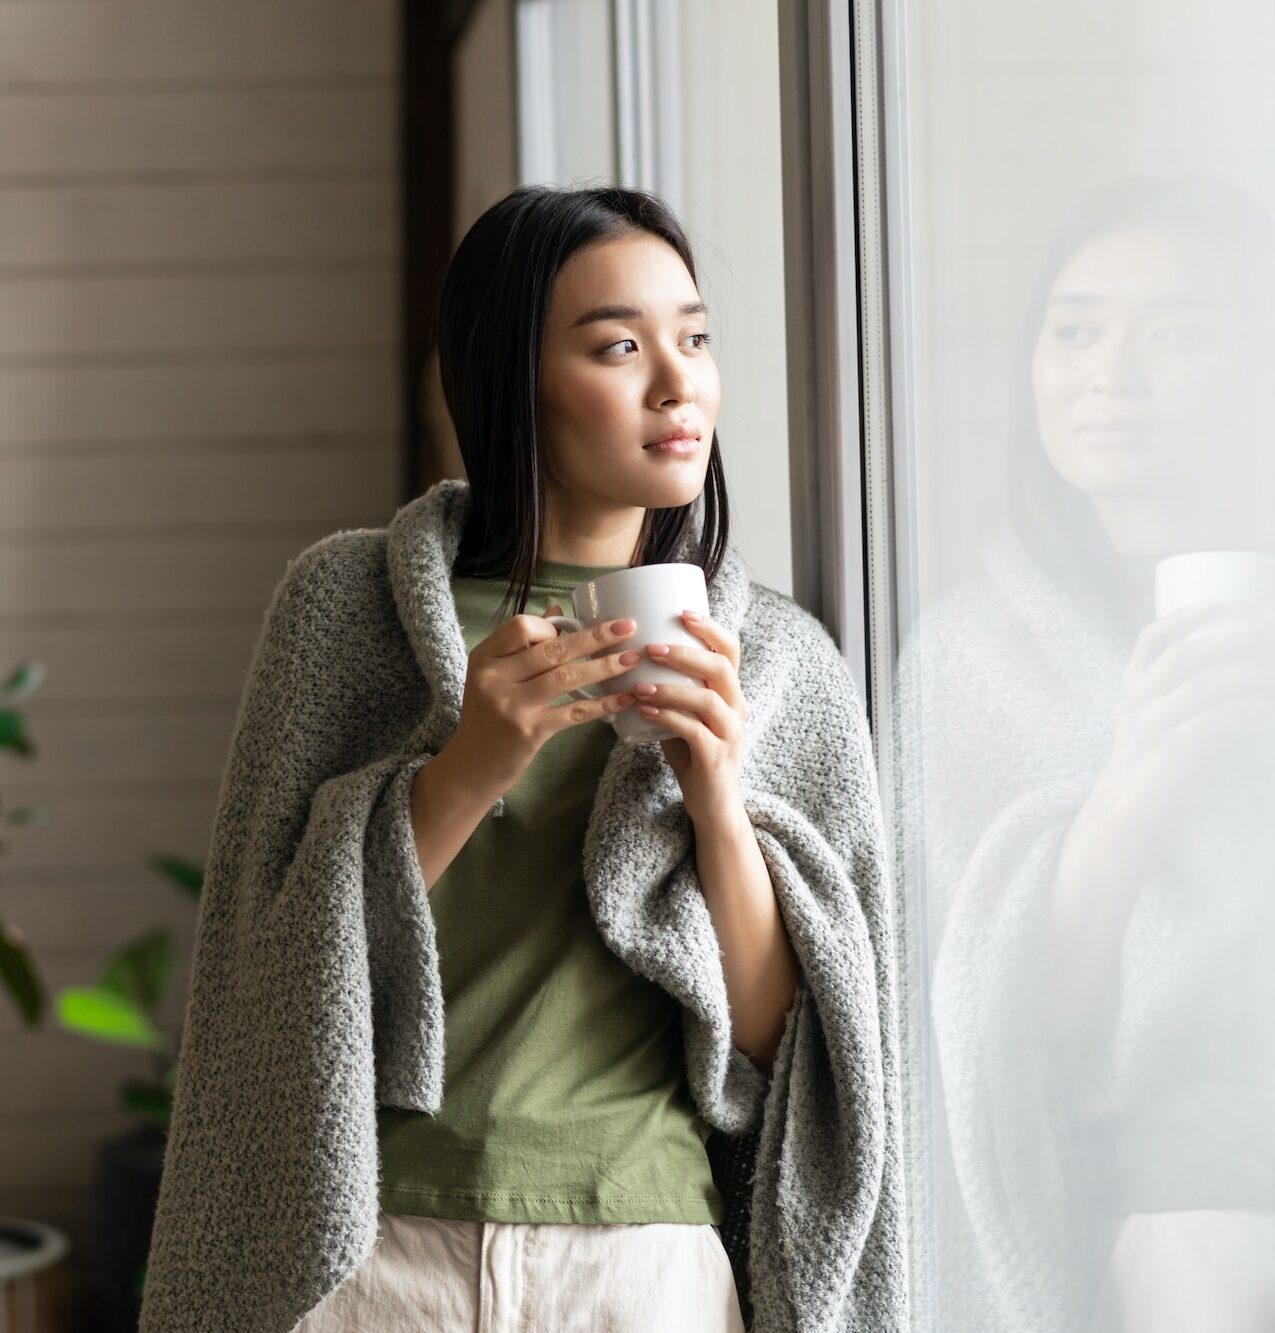 Beautiful asian woman wrapped in blanket, leaning on window and looking outside, drinking hot tea